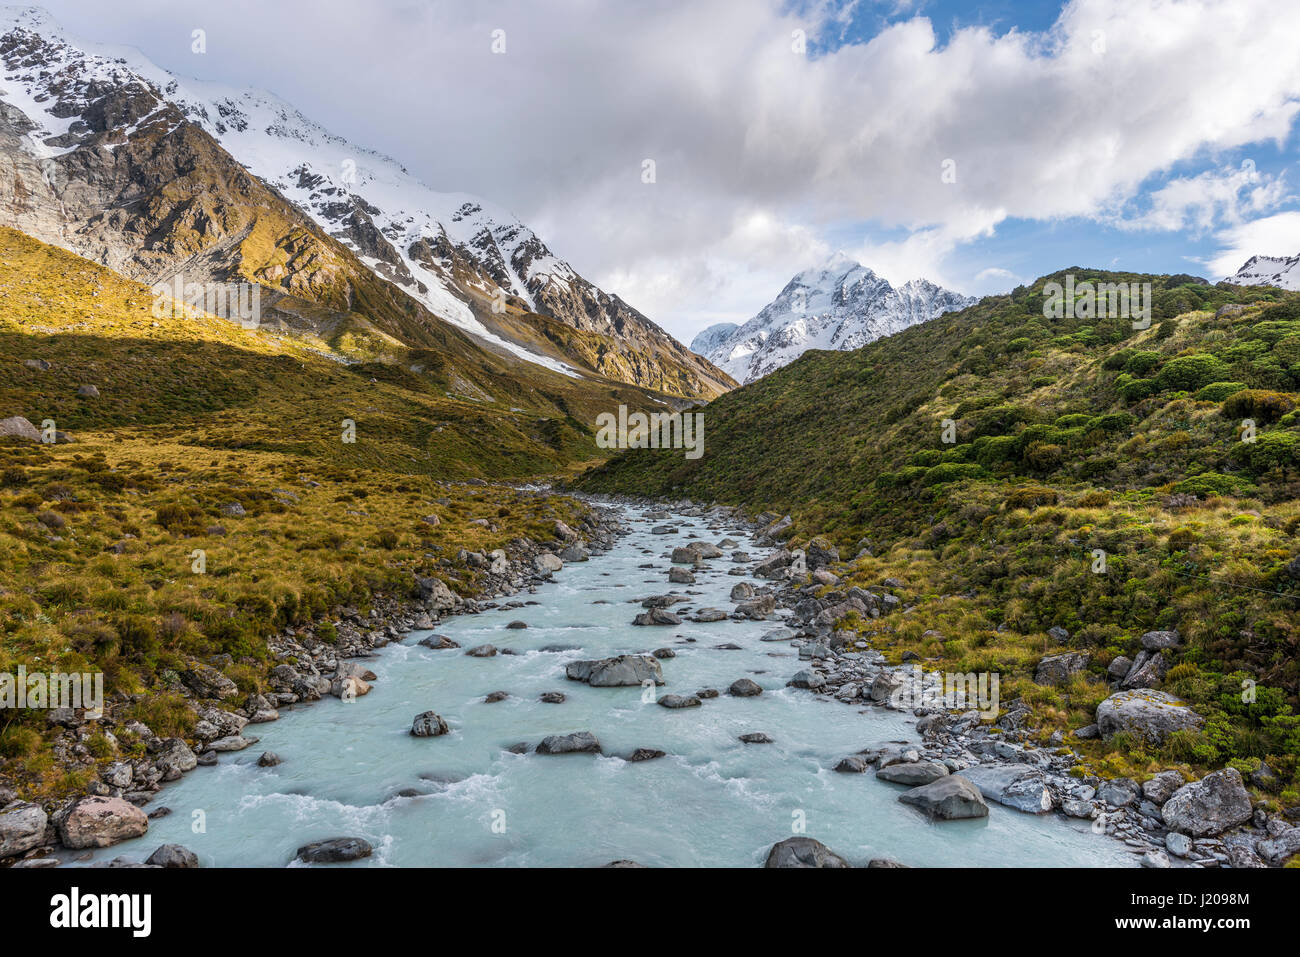 River flowing through valley, Hooker River, at back Mount Cook, Hooker Valley, Mount Cook National Park, Southern Alps Stock Photo